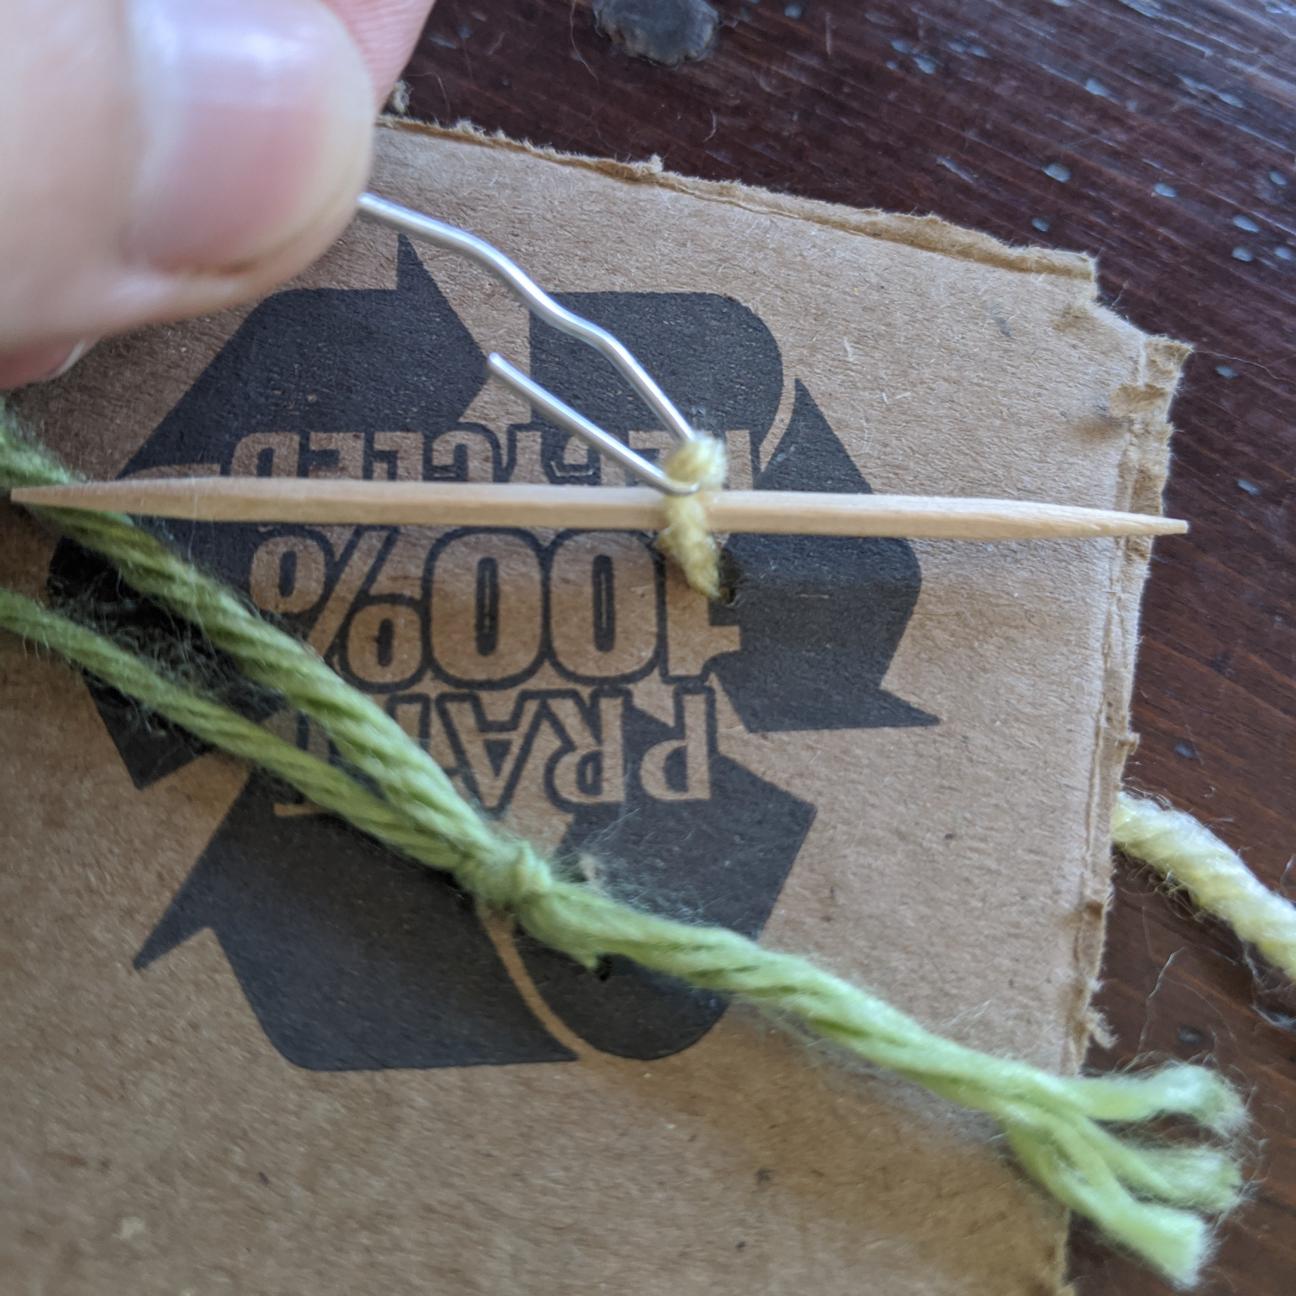 A loop of yarn pulled through cardboard, held with a paperclip hook. There is a toothpick inserted in the loop.